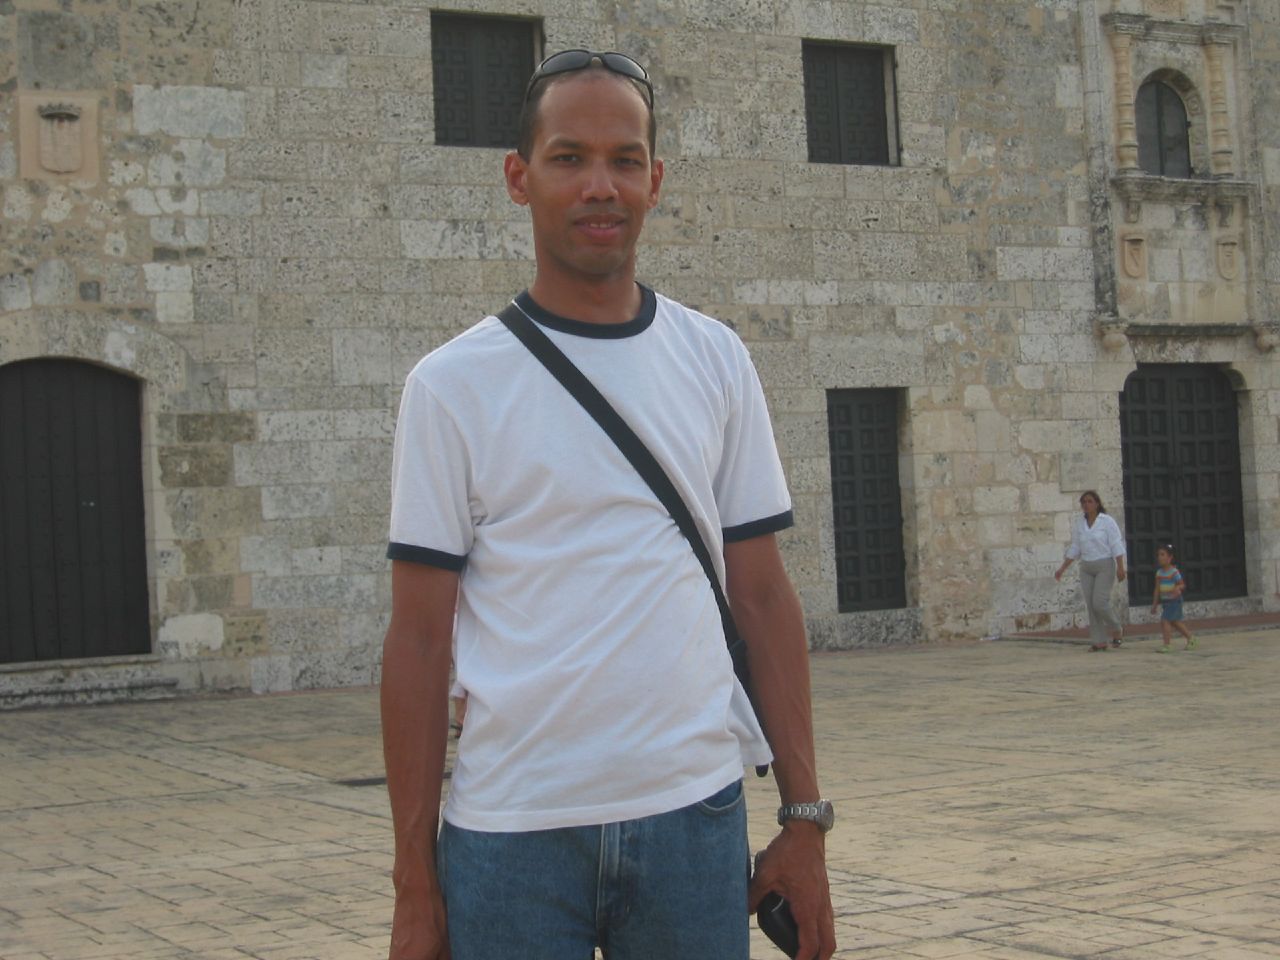 a man wearing a white shirt and blue jeans